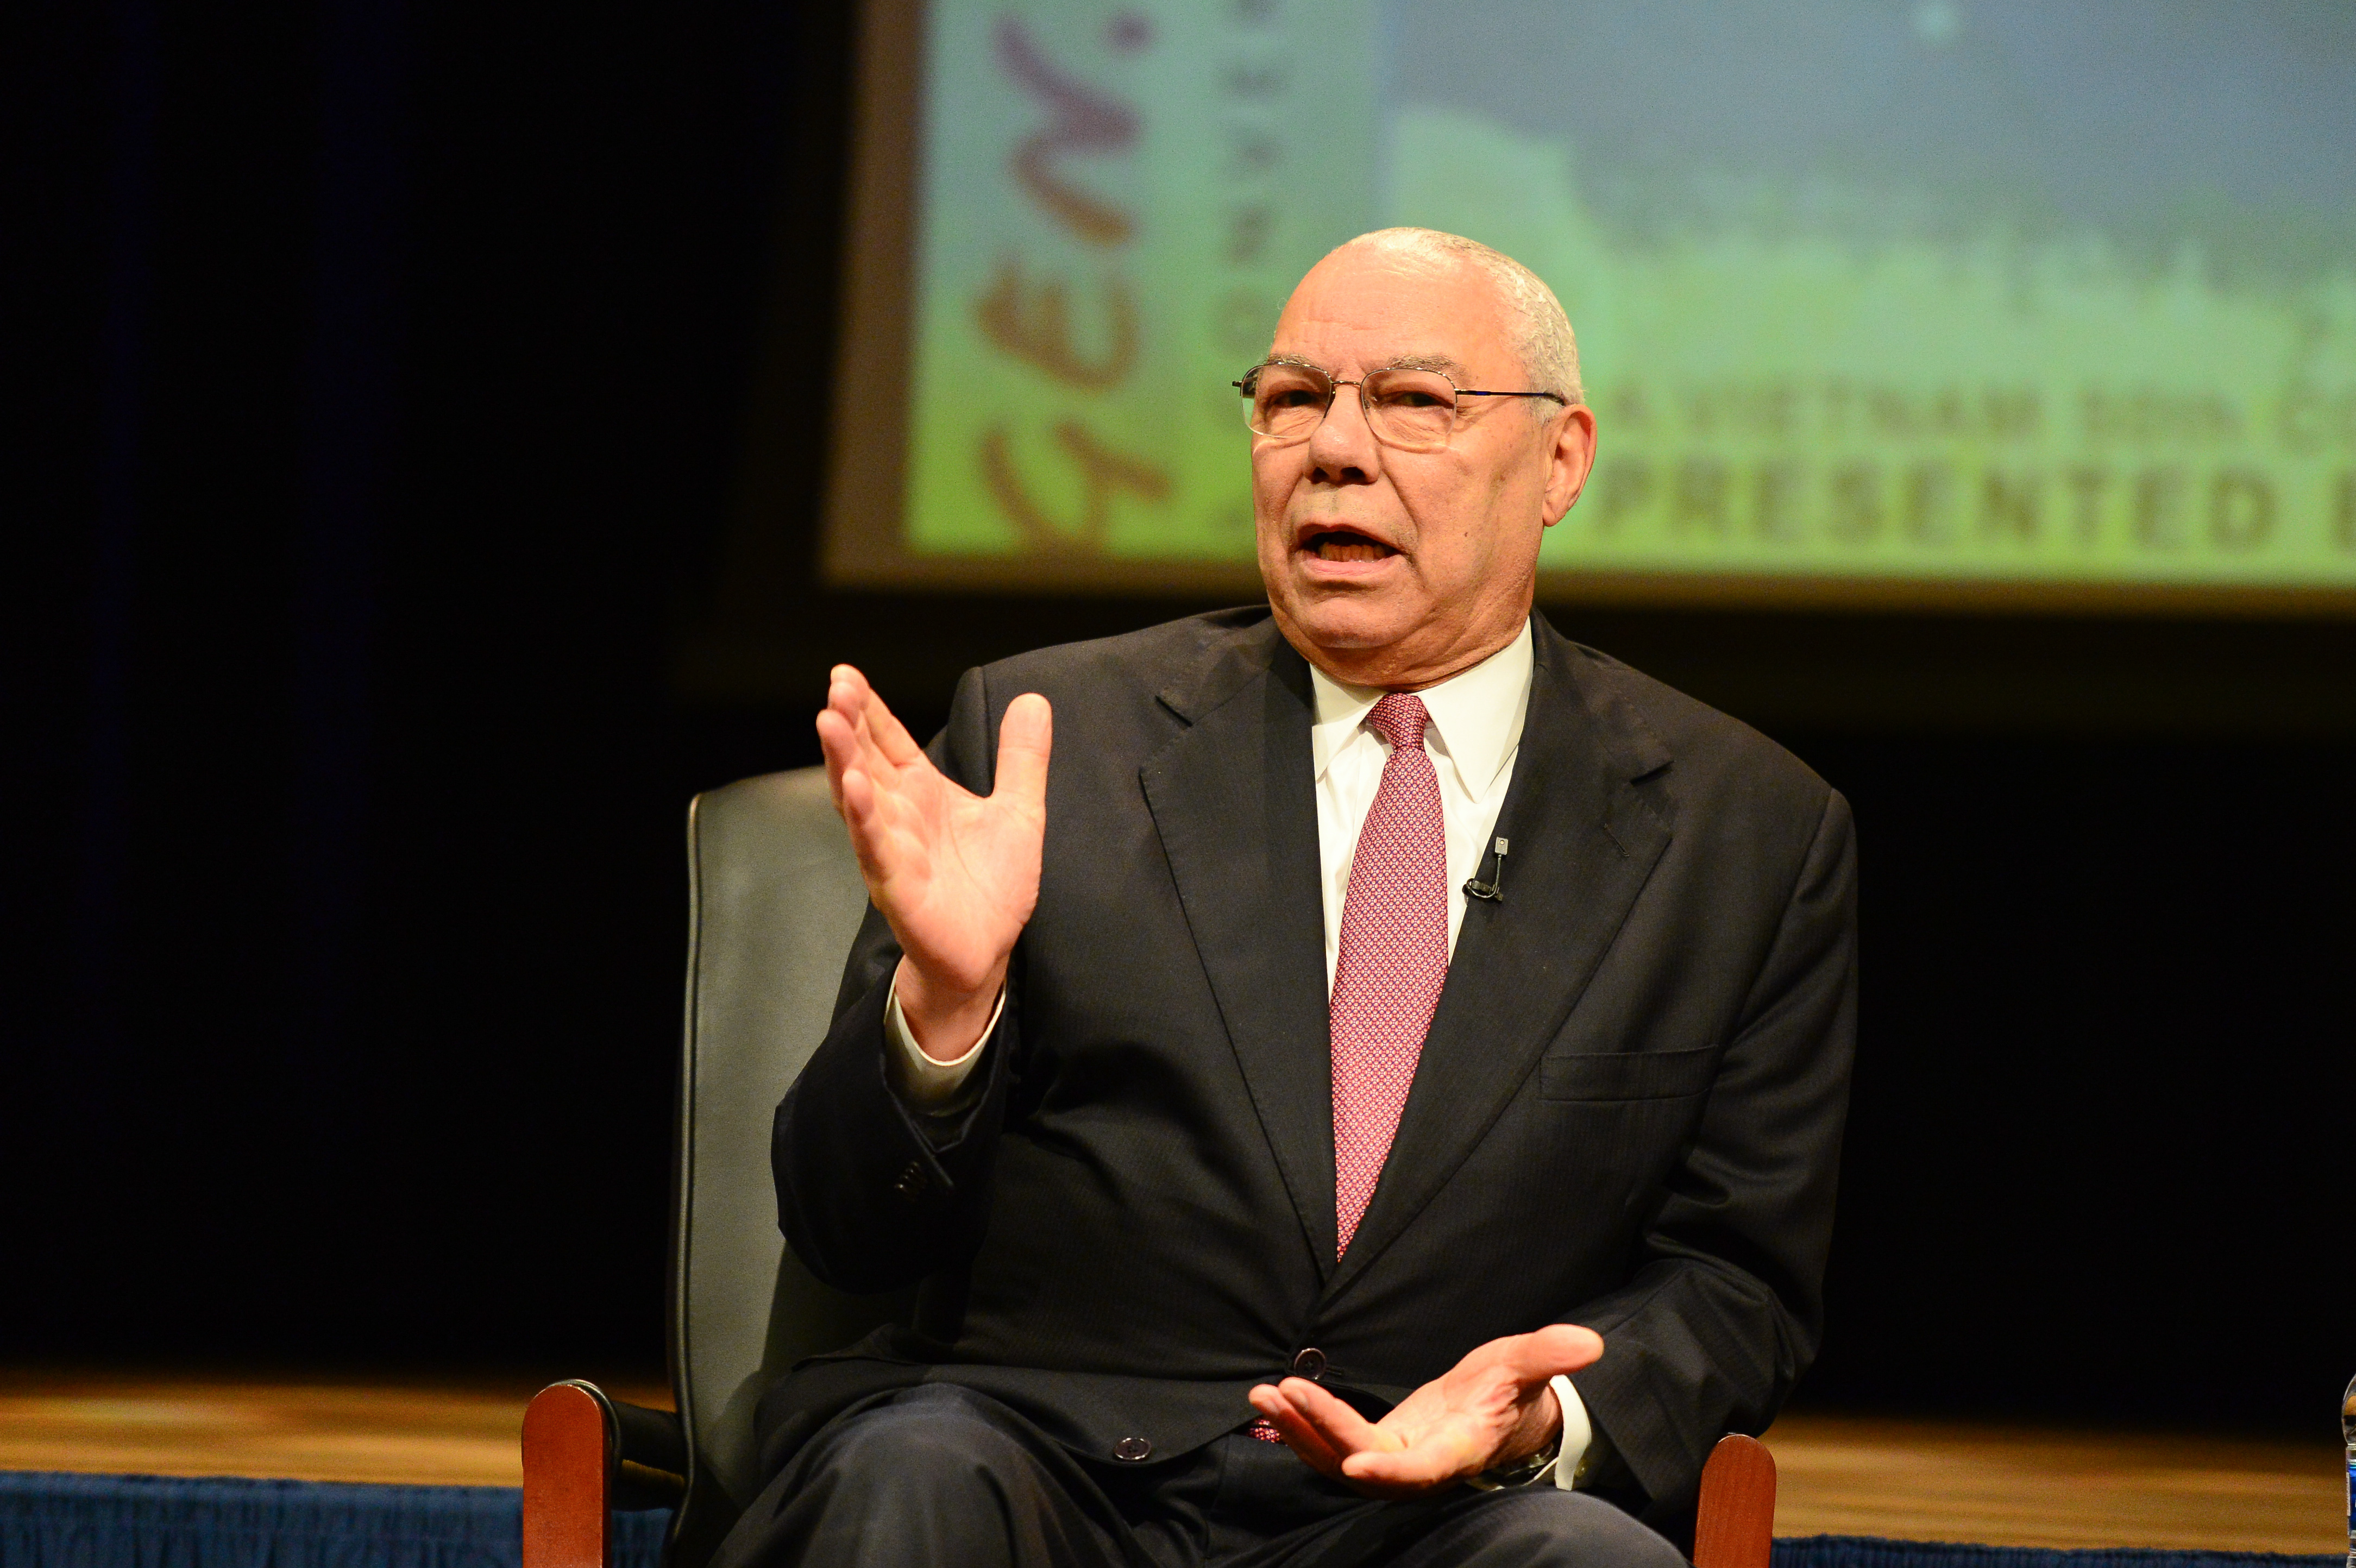 General Colin Powell speaks at an event at the Pentagon in Arlington, to commemorating the 50th anniversary of the Vietnam War. Credit: U.S. Army